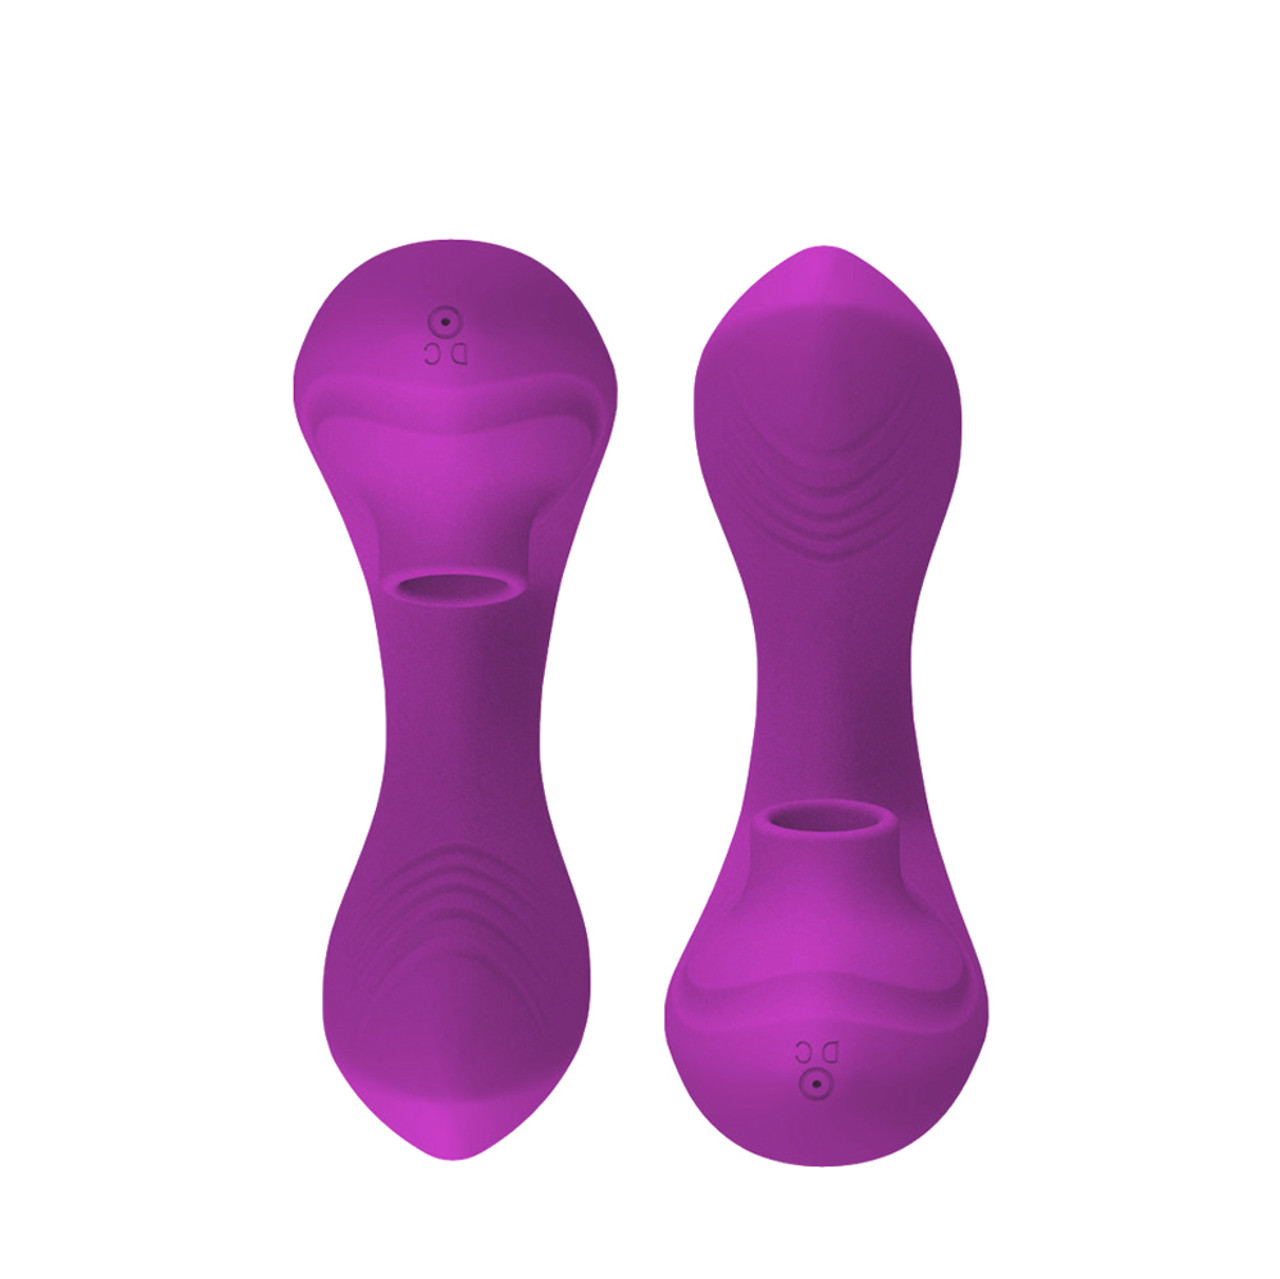 Voodoo Beso Flower Power Rose Clit Suction Vibrator – The Pleasure Parlor